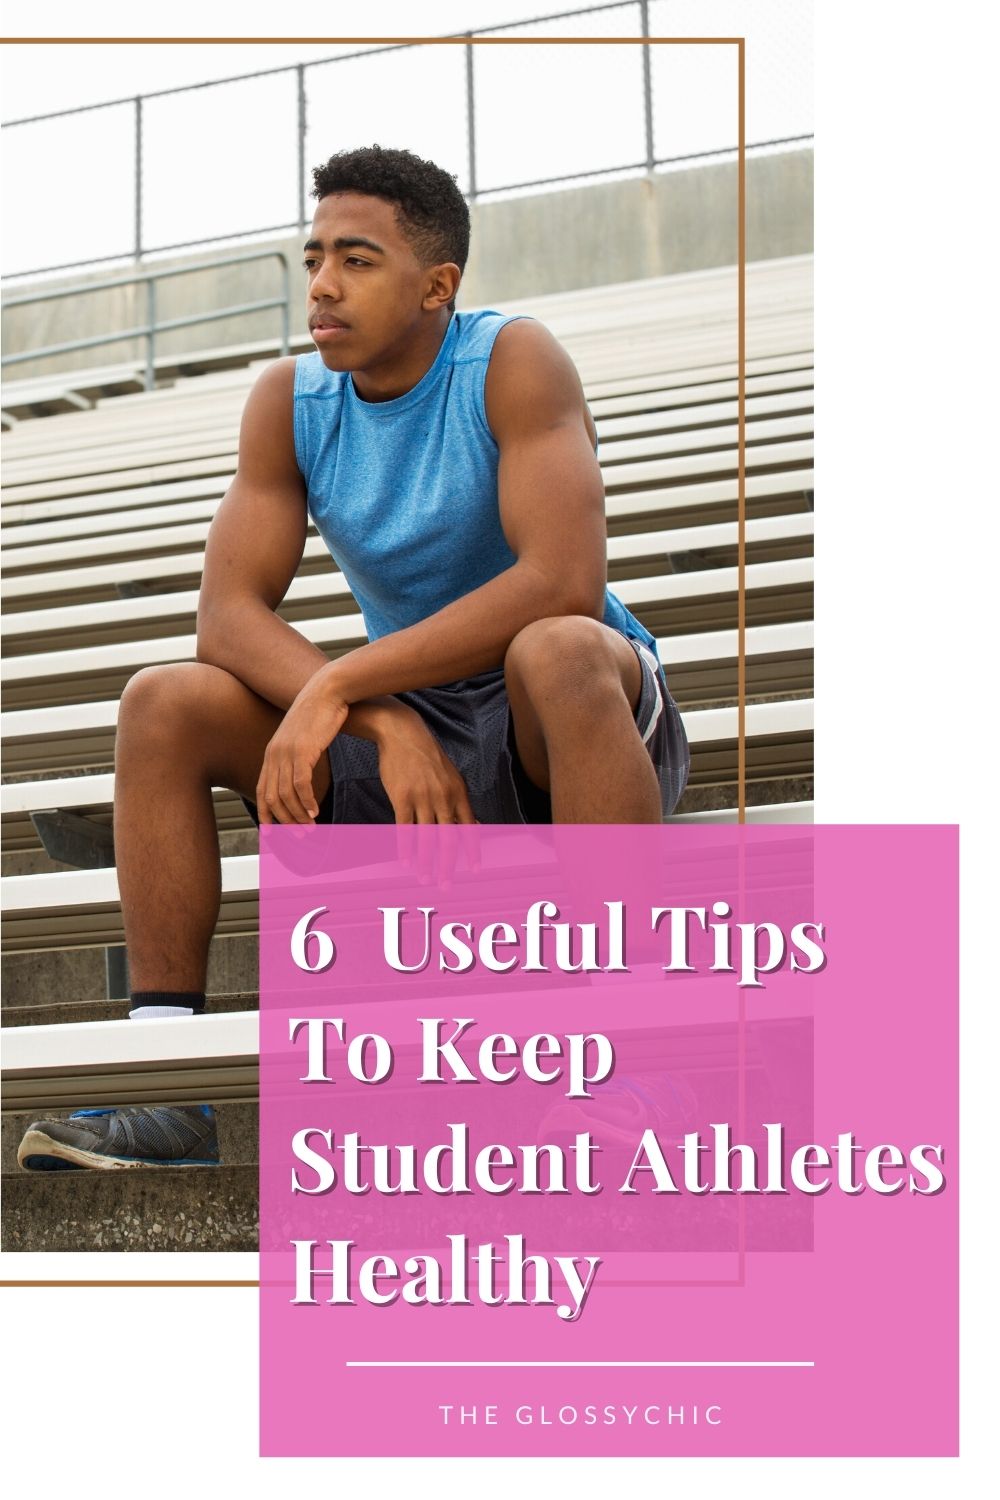 How To Keep Student Athletes Healthy - 6 Useful Tips